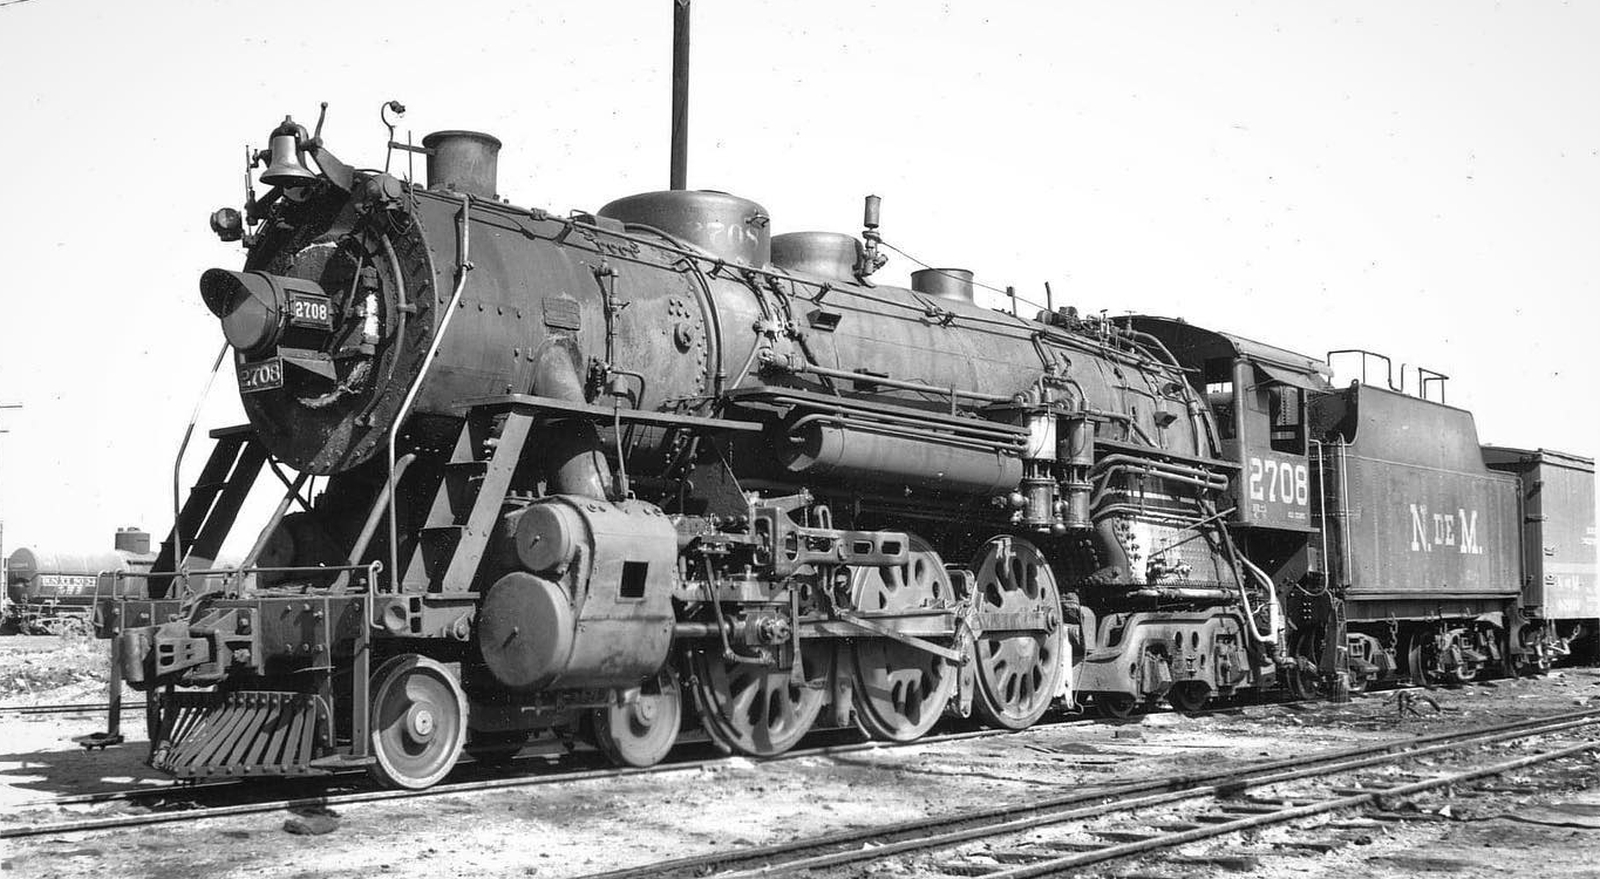 No. 2708 in January 1960 in Puebla